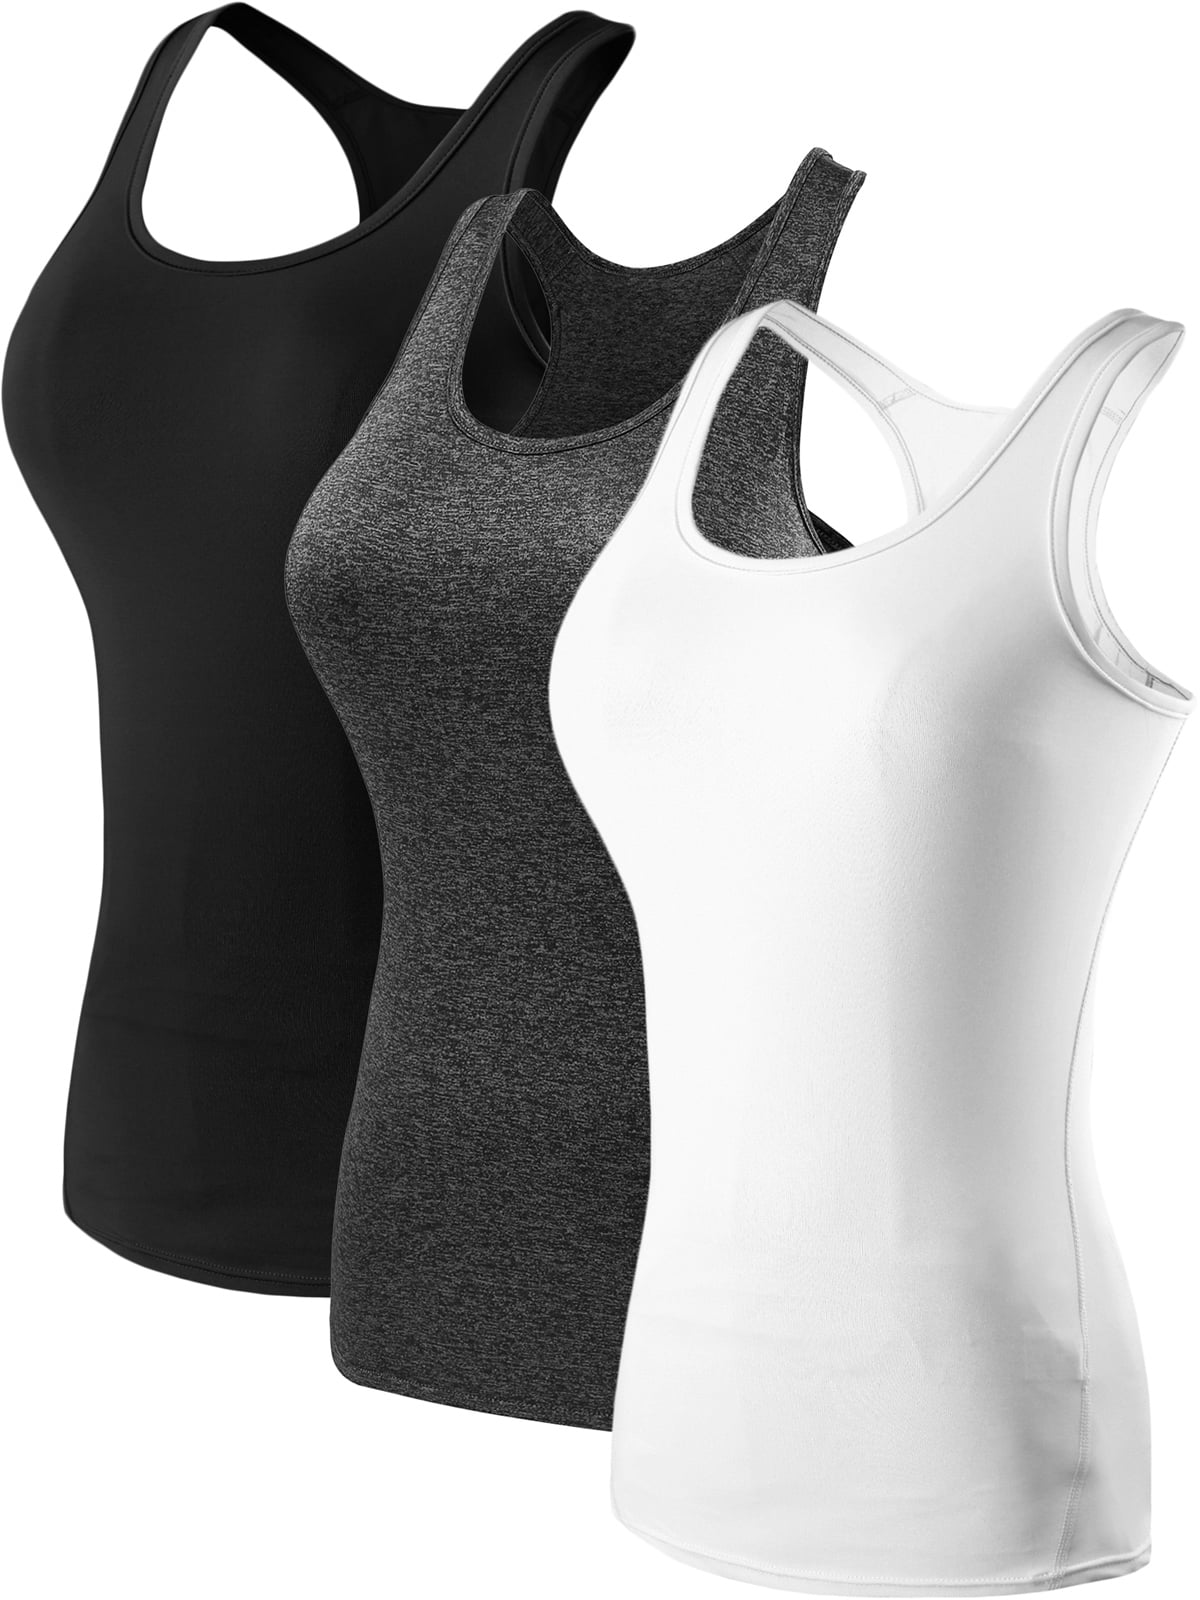 Fit NELEUS Base Size Top Compression Layer Pack,Black+Gray+White,US Womens Dry XS 3 Tank